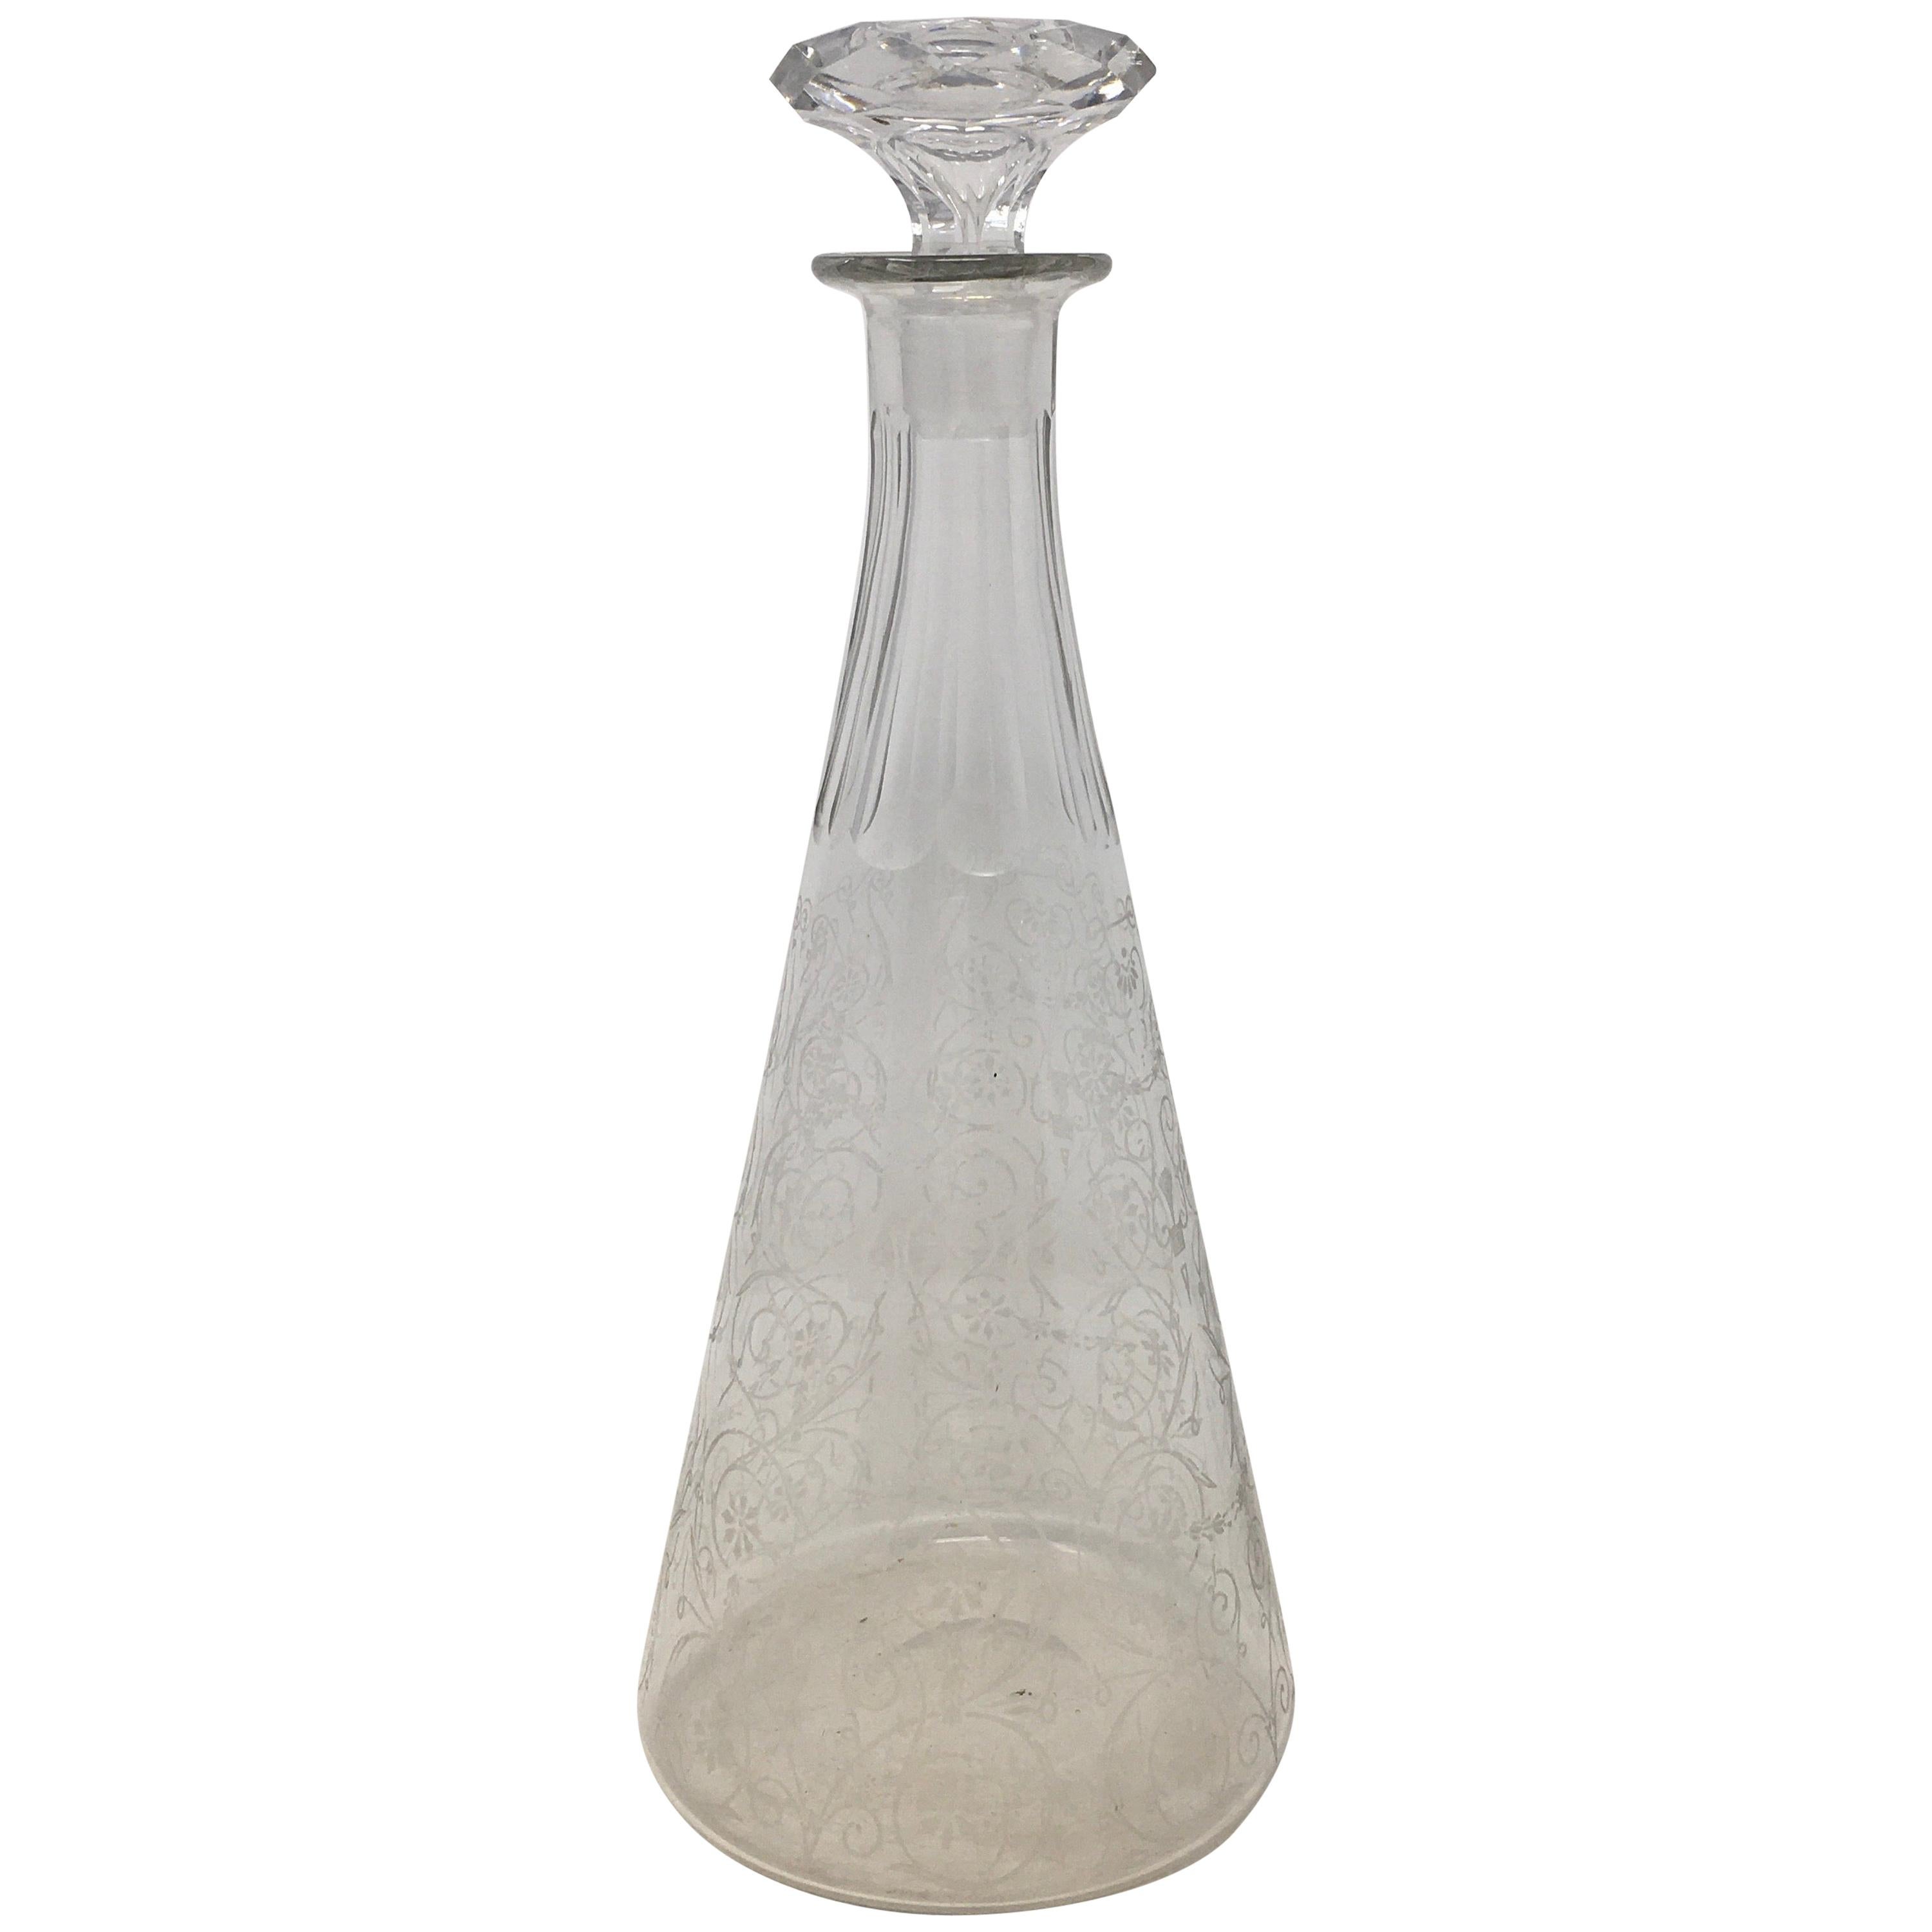 19th Century Etched Glass Decanter